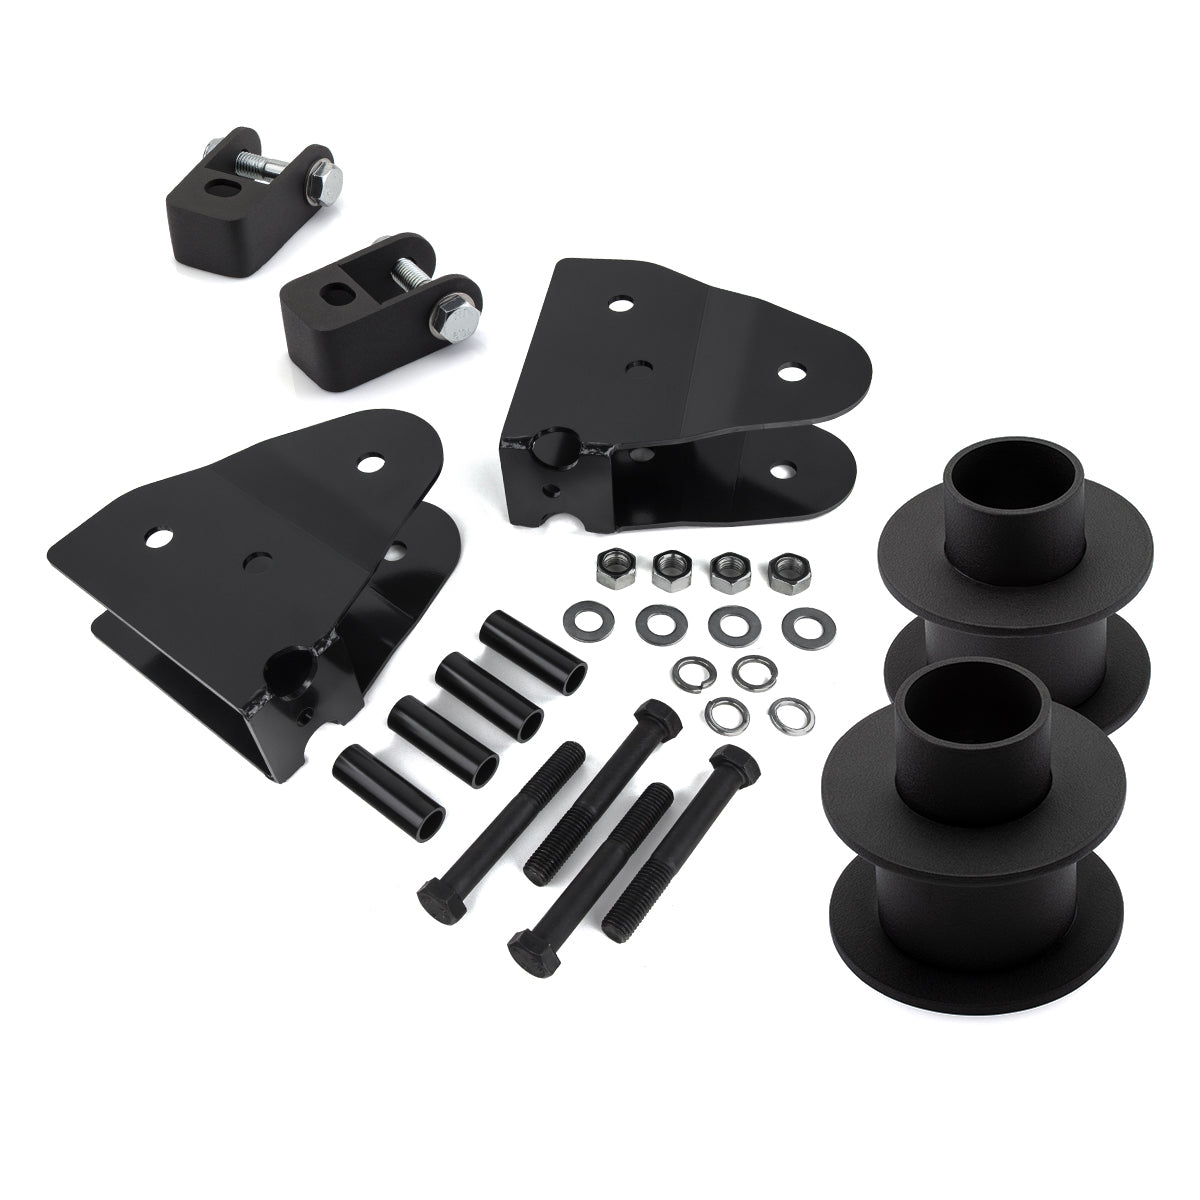 2005-2016 Ford F-350 Full Lift Kit with Front Shock Extender and Radius Arm Drop Brackets